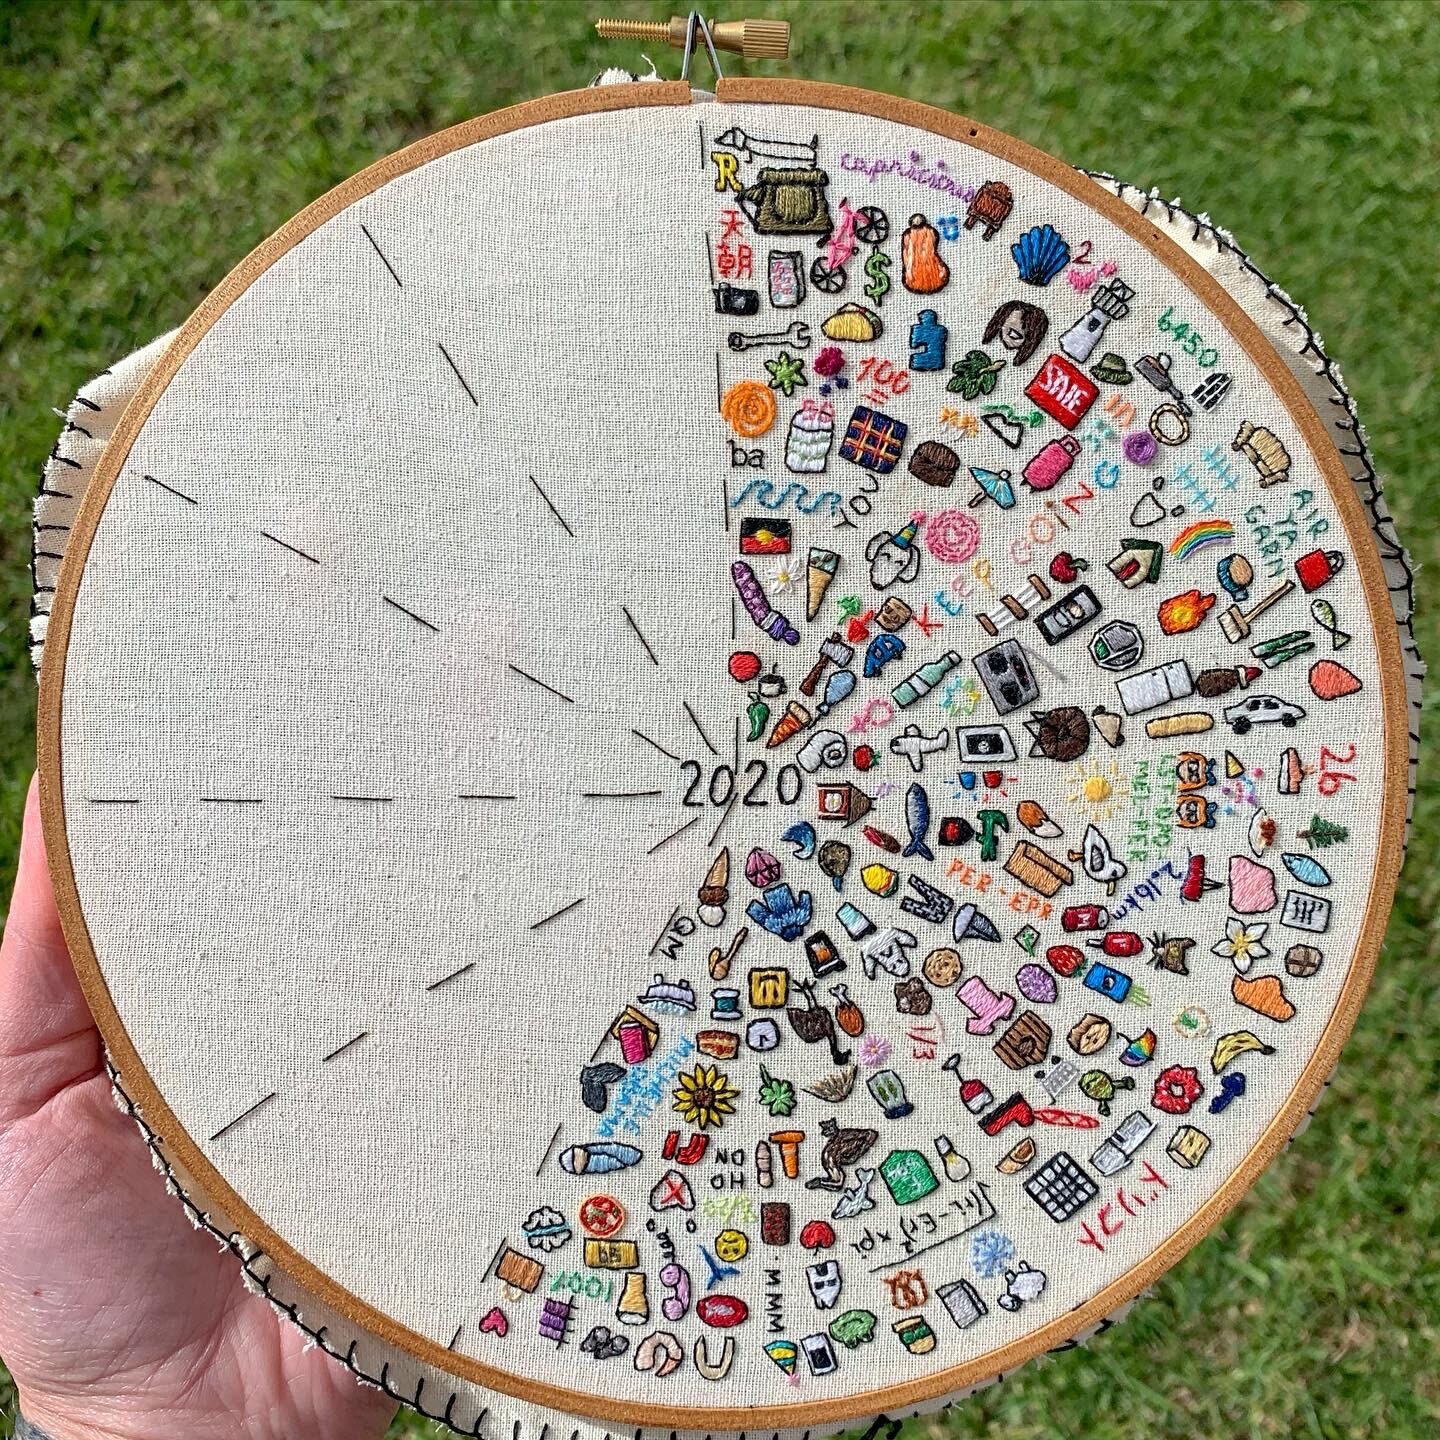 Why You Need to Keep an Embroidery Journal